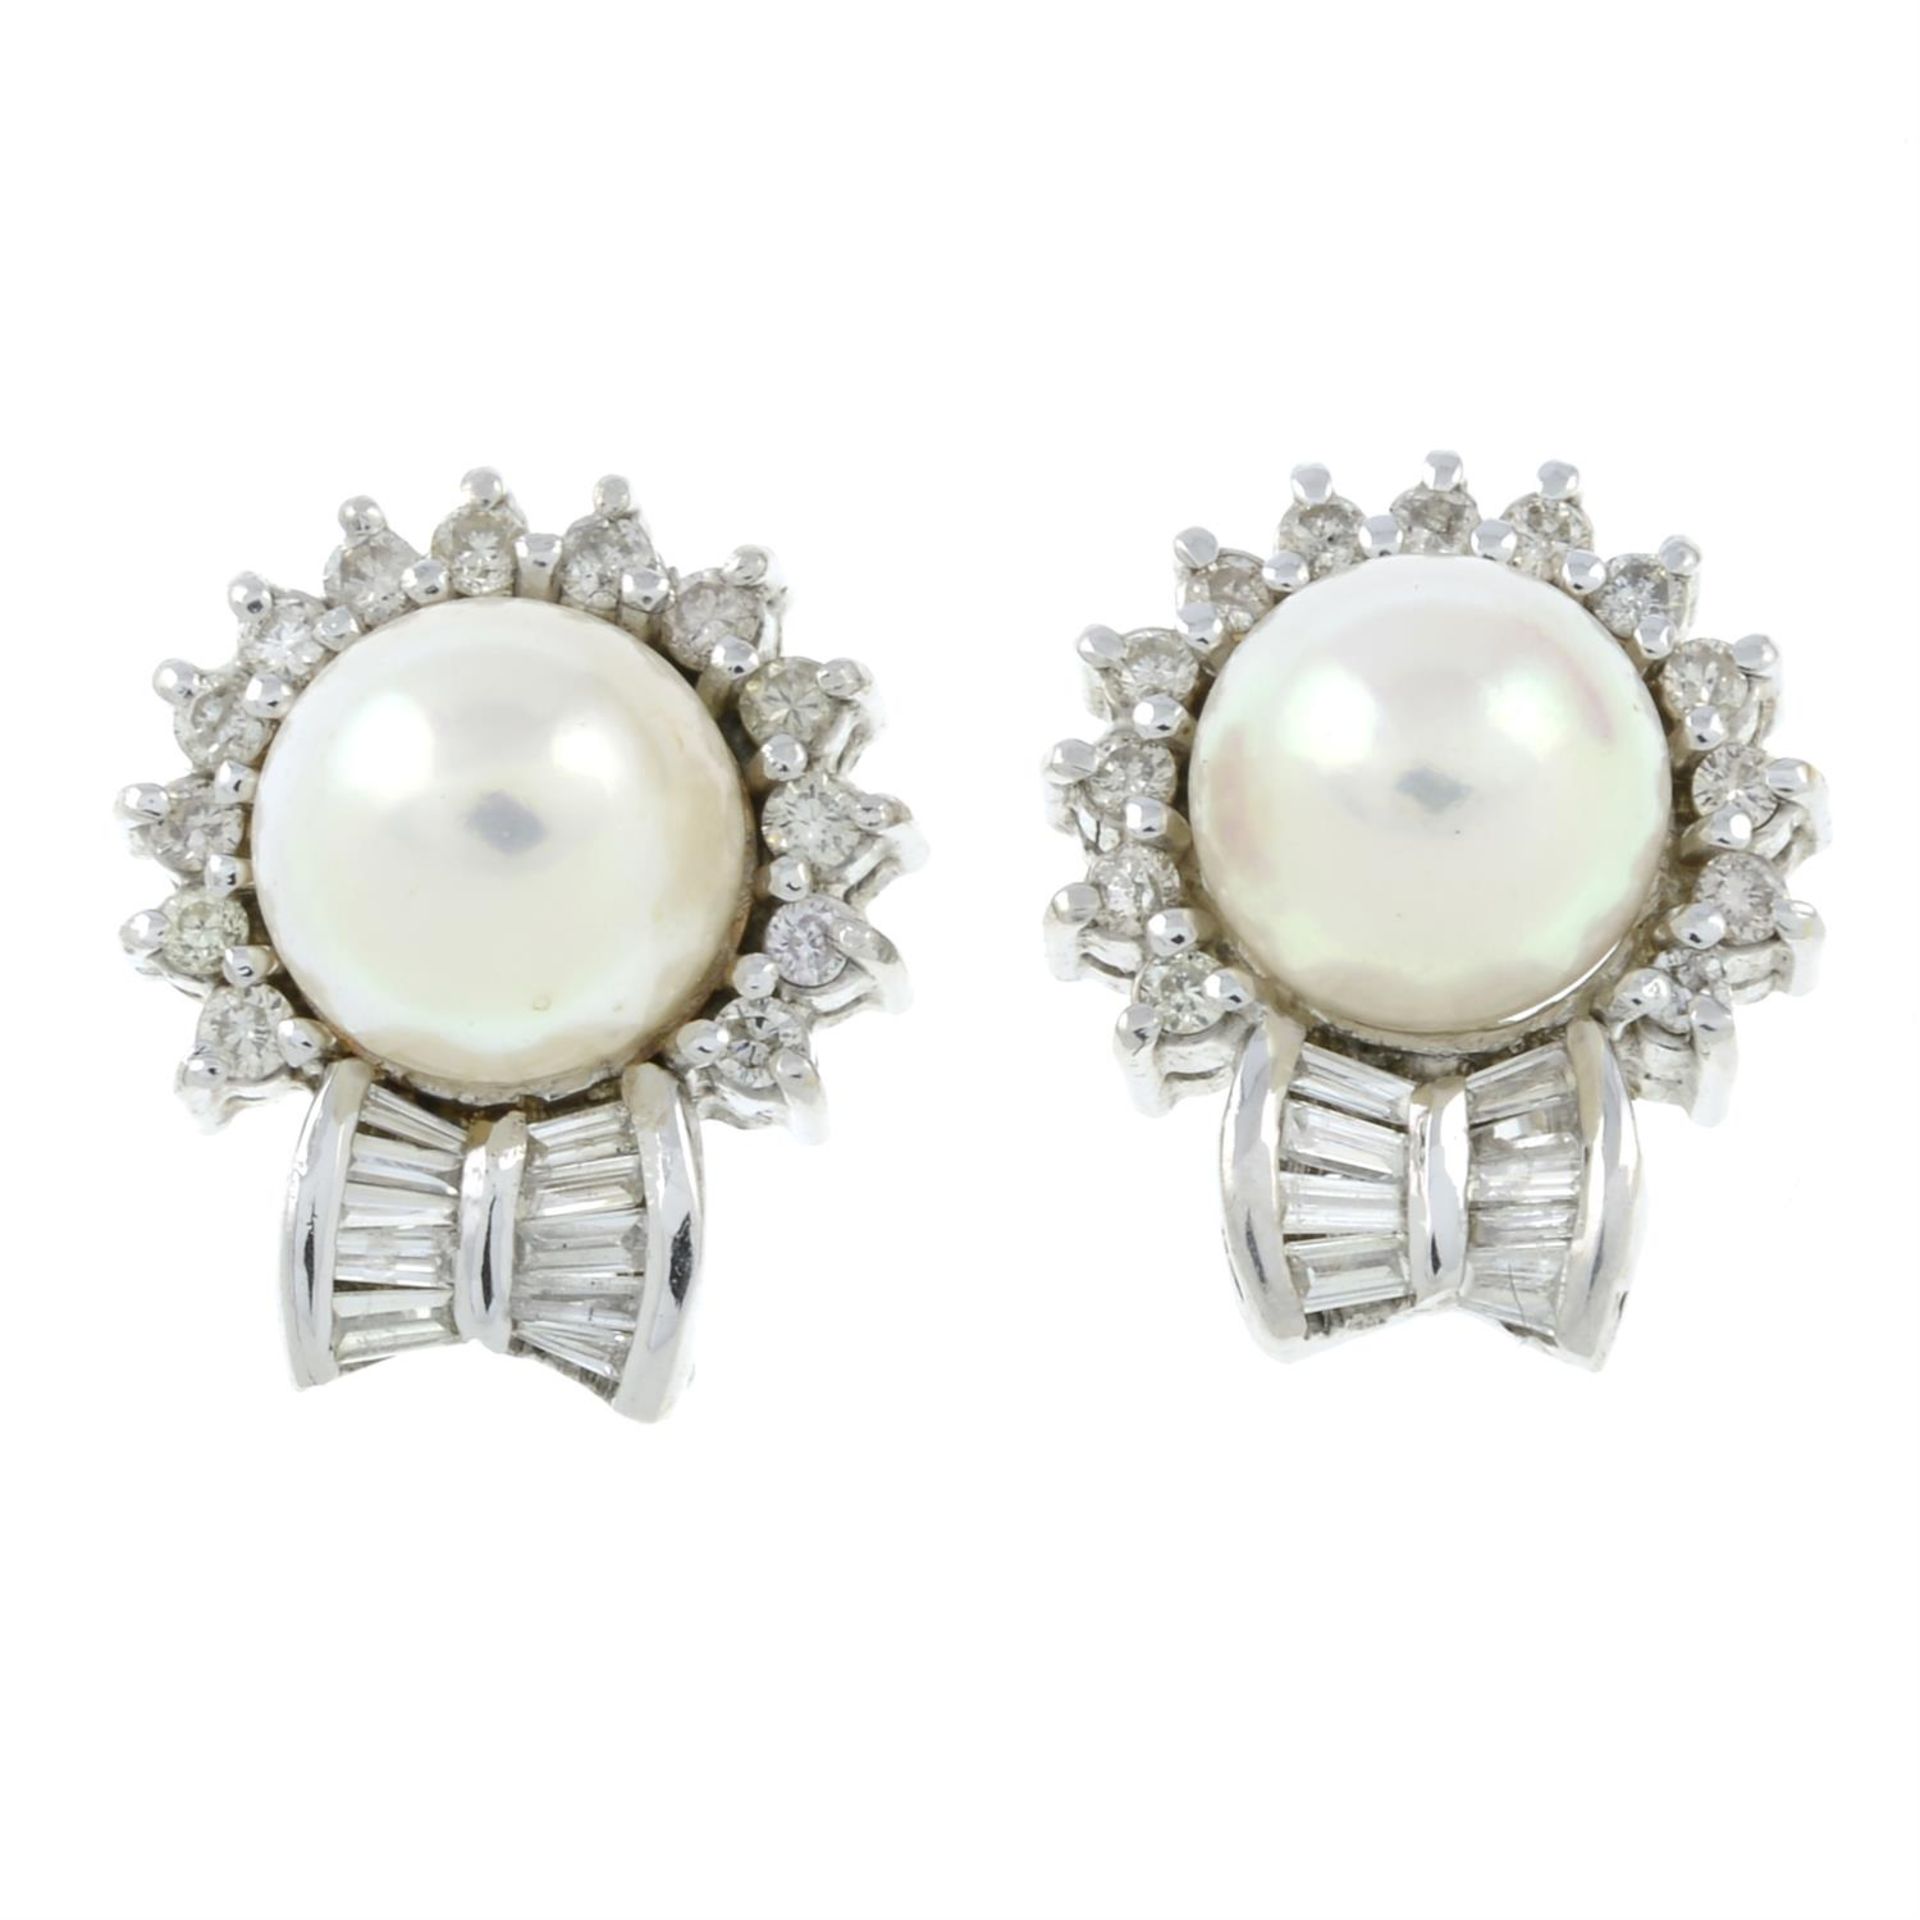 A 9ct gold cultured pearl and vari-cut diamond cluster earrings.